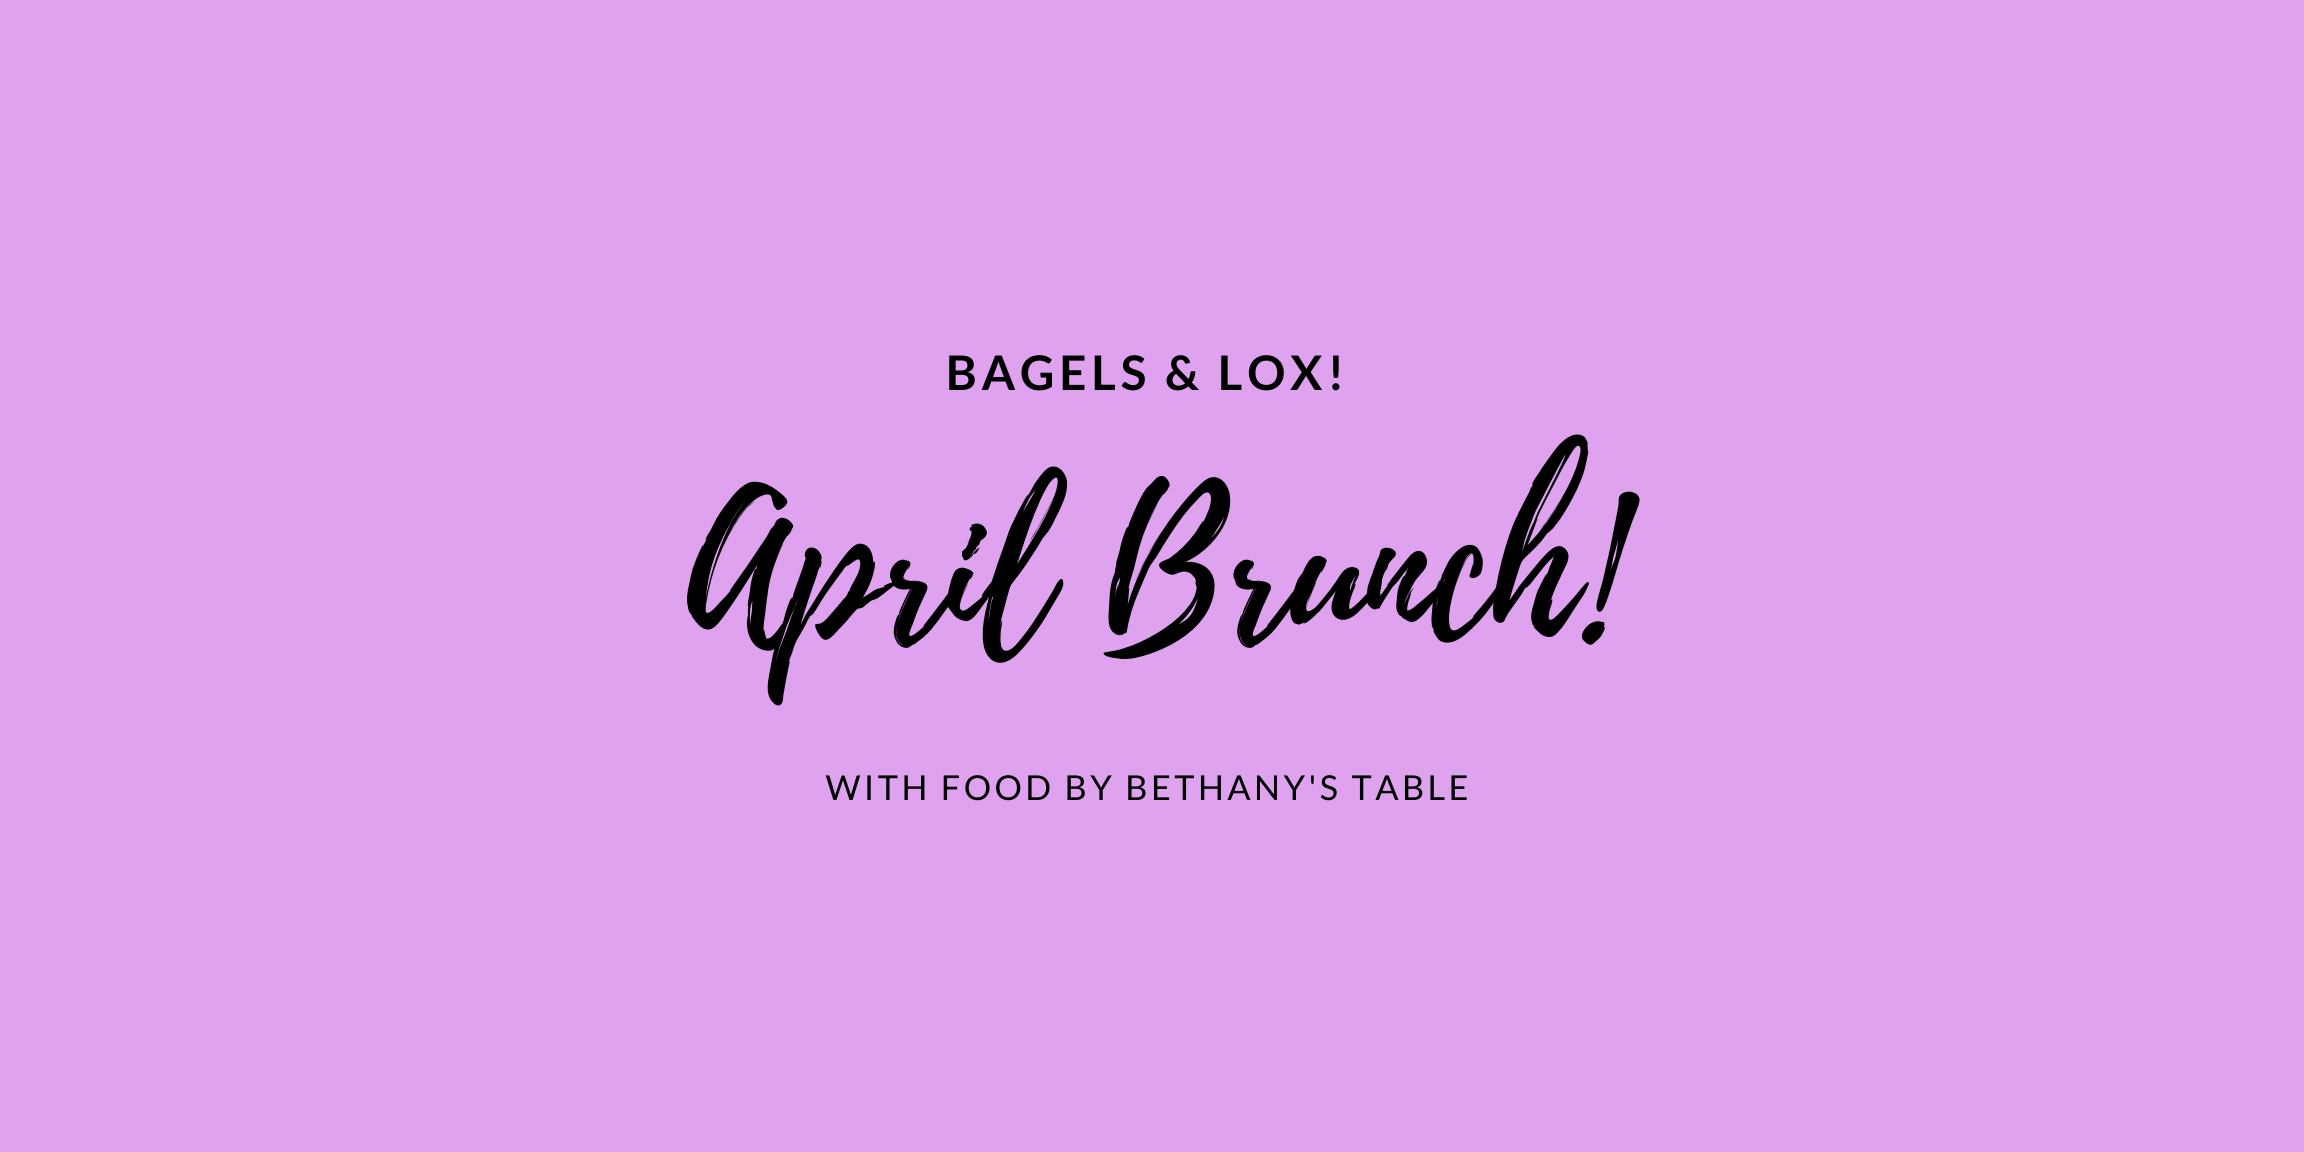 Bagels and Lox! April Brunch! With food by Bethany's Table